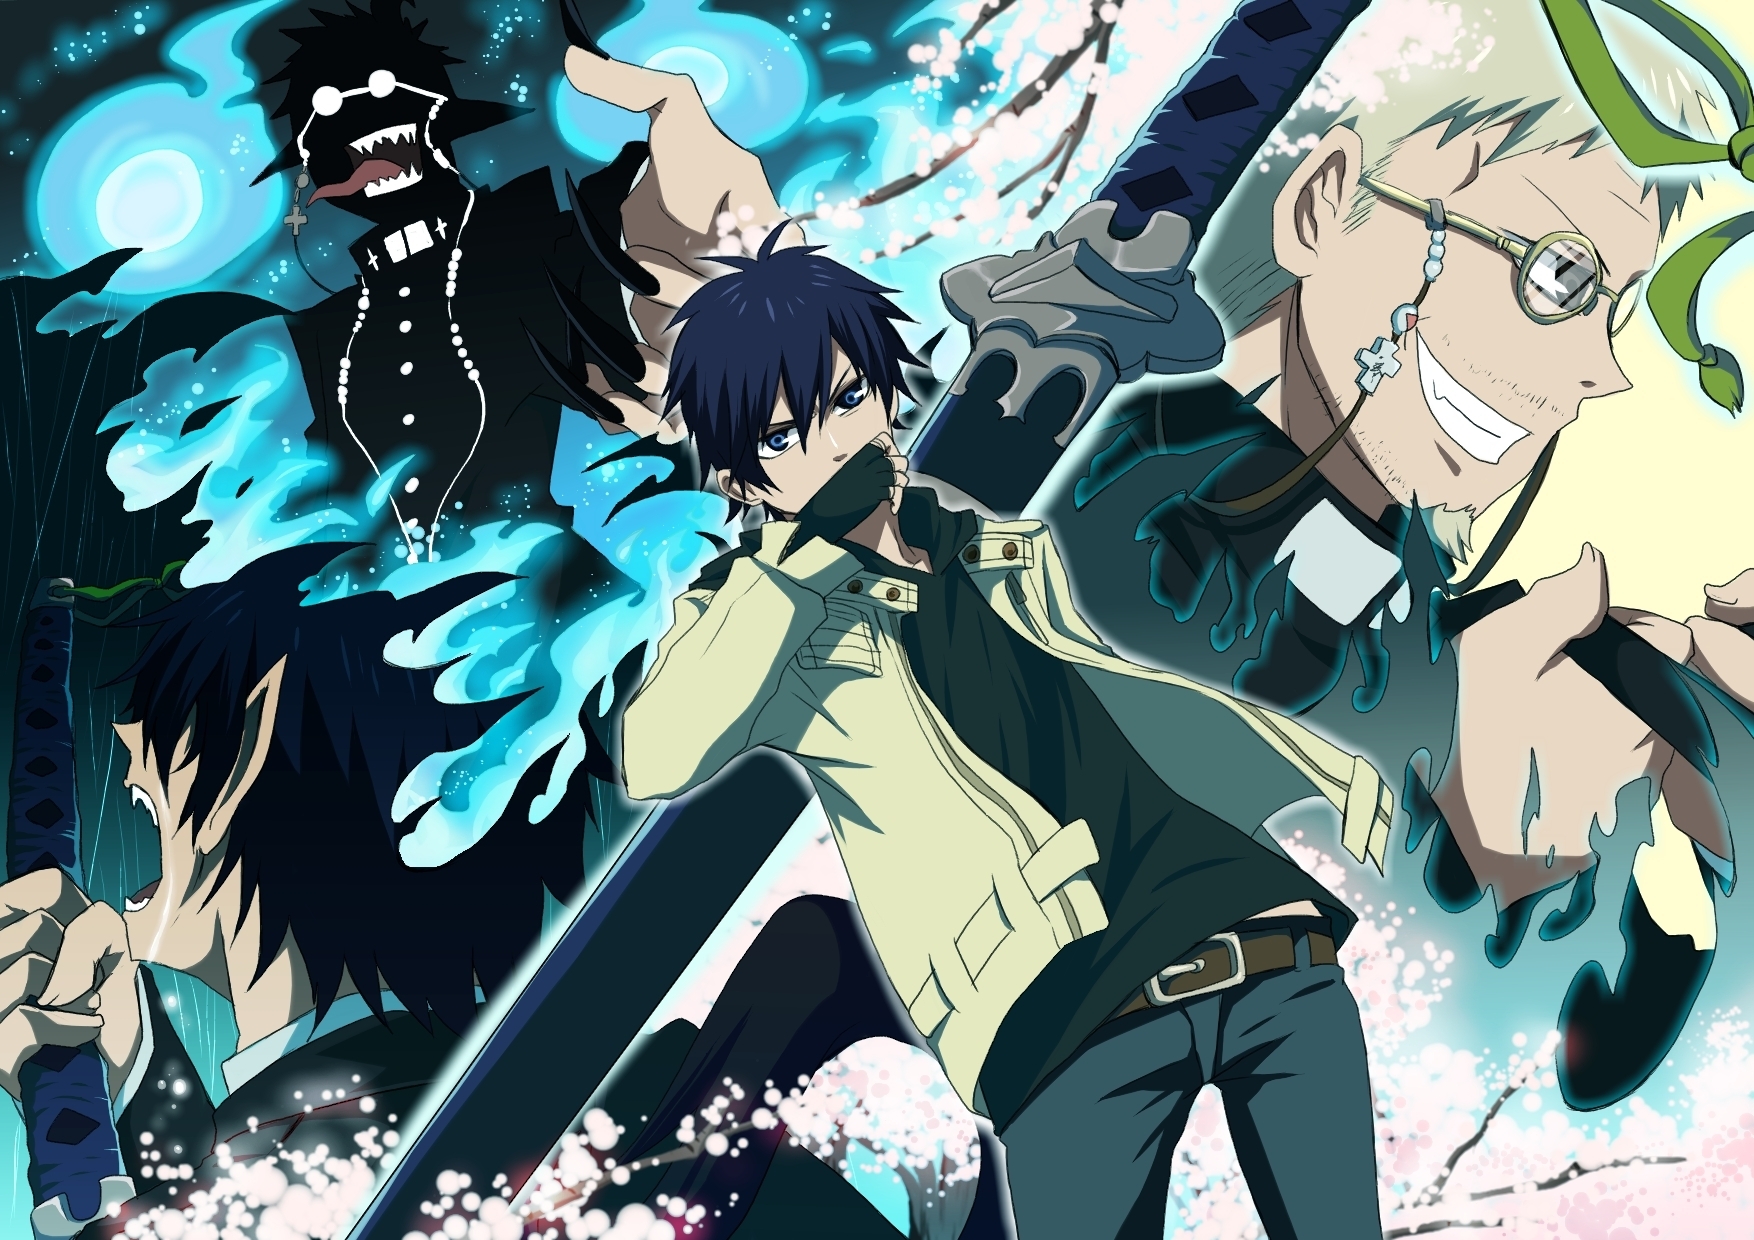 The anime Kingdom Wallpaper: Blue Exorcist characters.